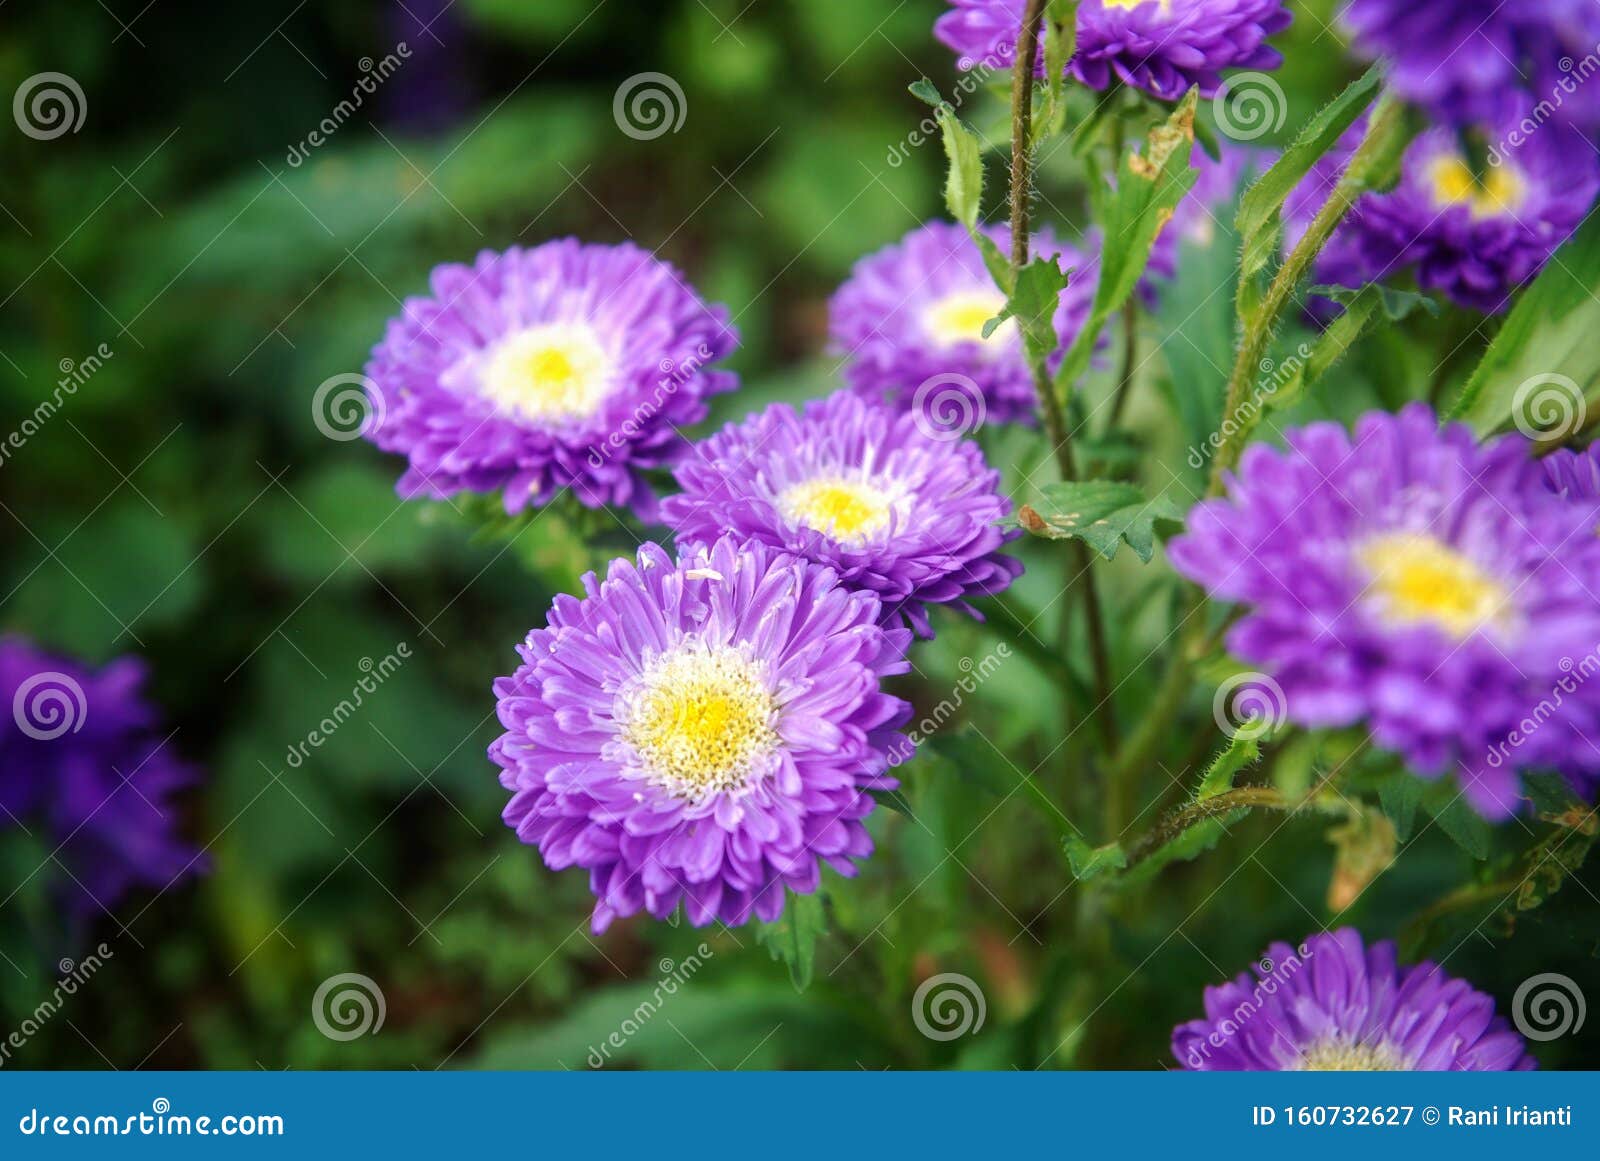 Blue Annual Aster Or China Aster Flower Callistephus Chinensis Stock Image Image Of Blossom Farming 160732627